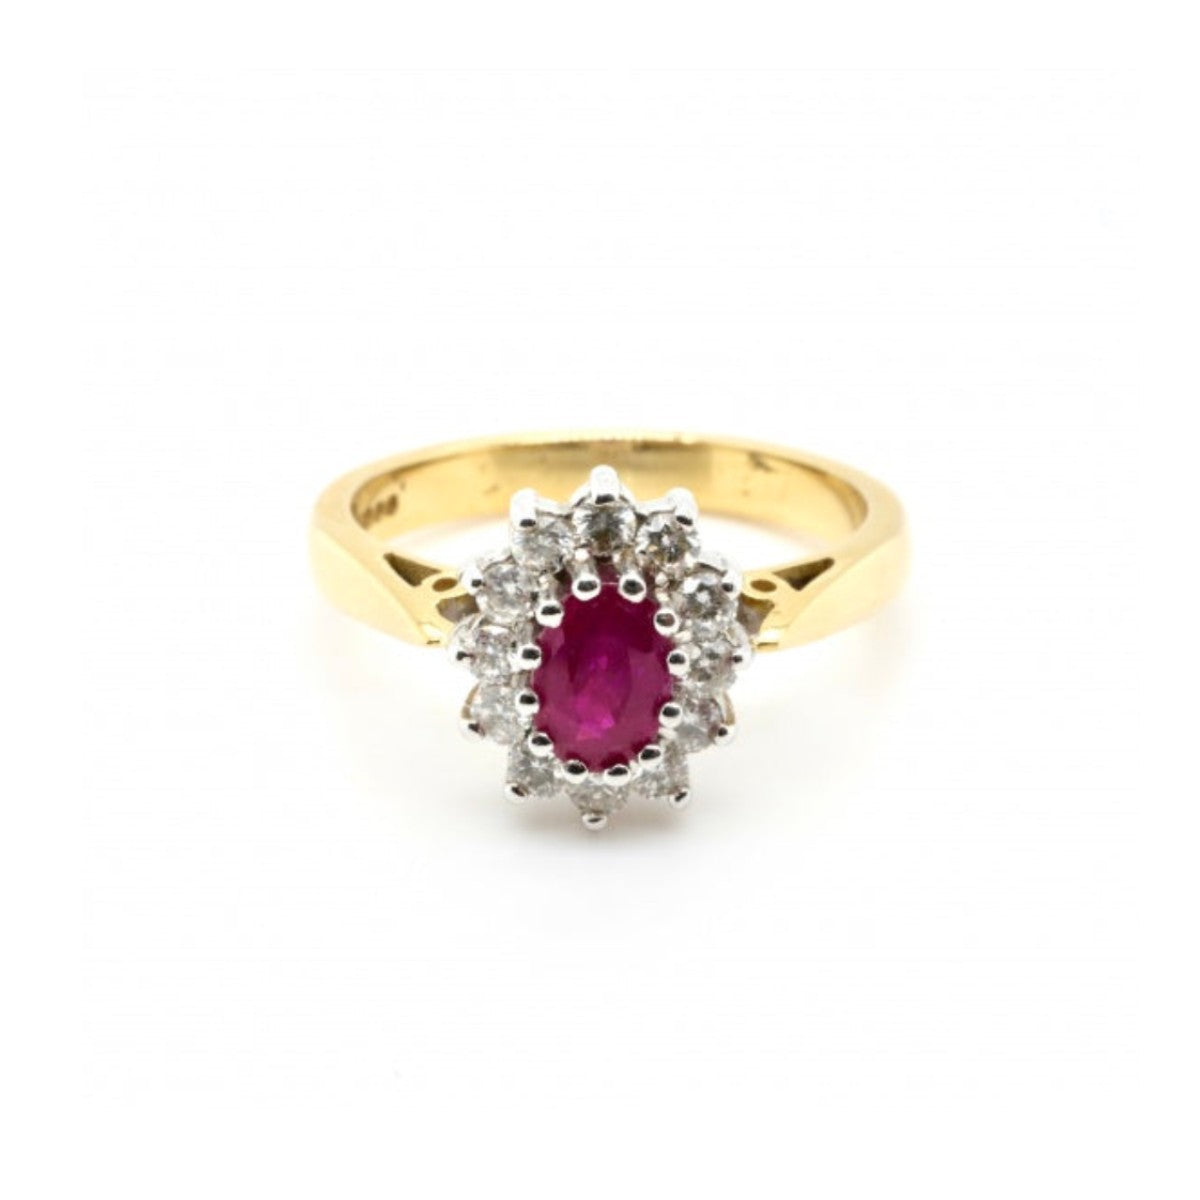 18ct Yellow Gold Oval Ruby & Diamond Cluster Ring - Size M 1/2